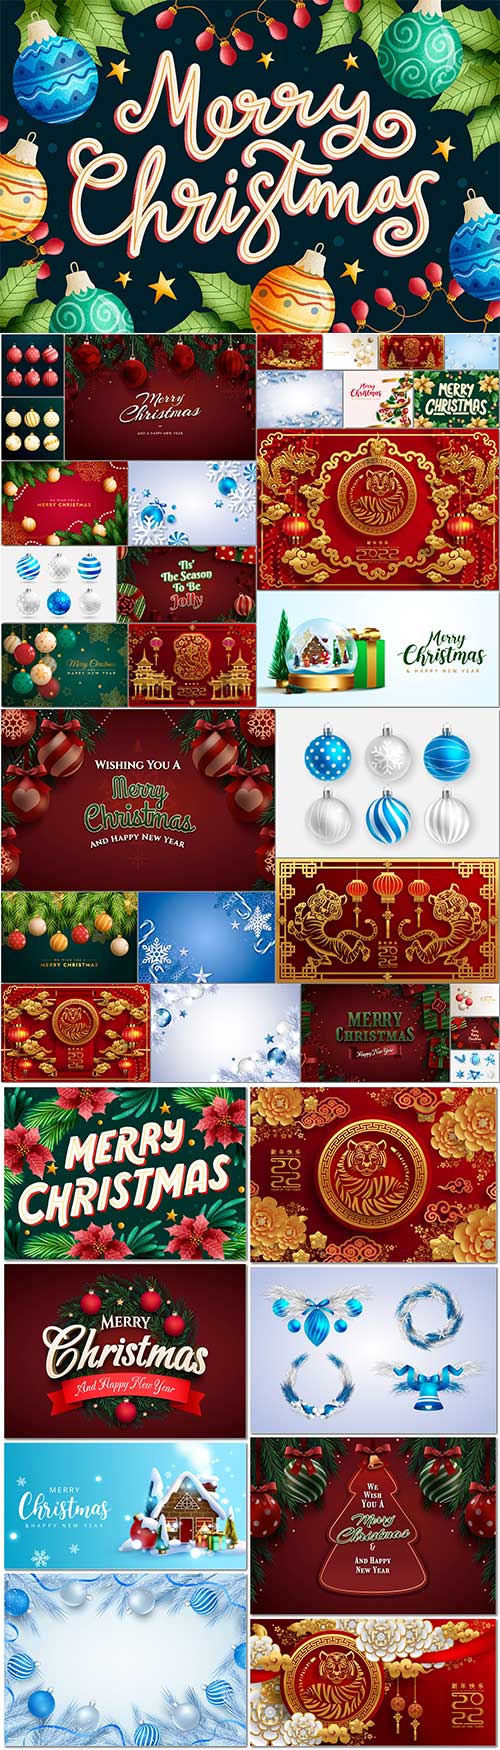 Concept of merry christmas and happy new year premium vector